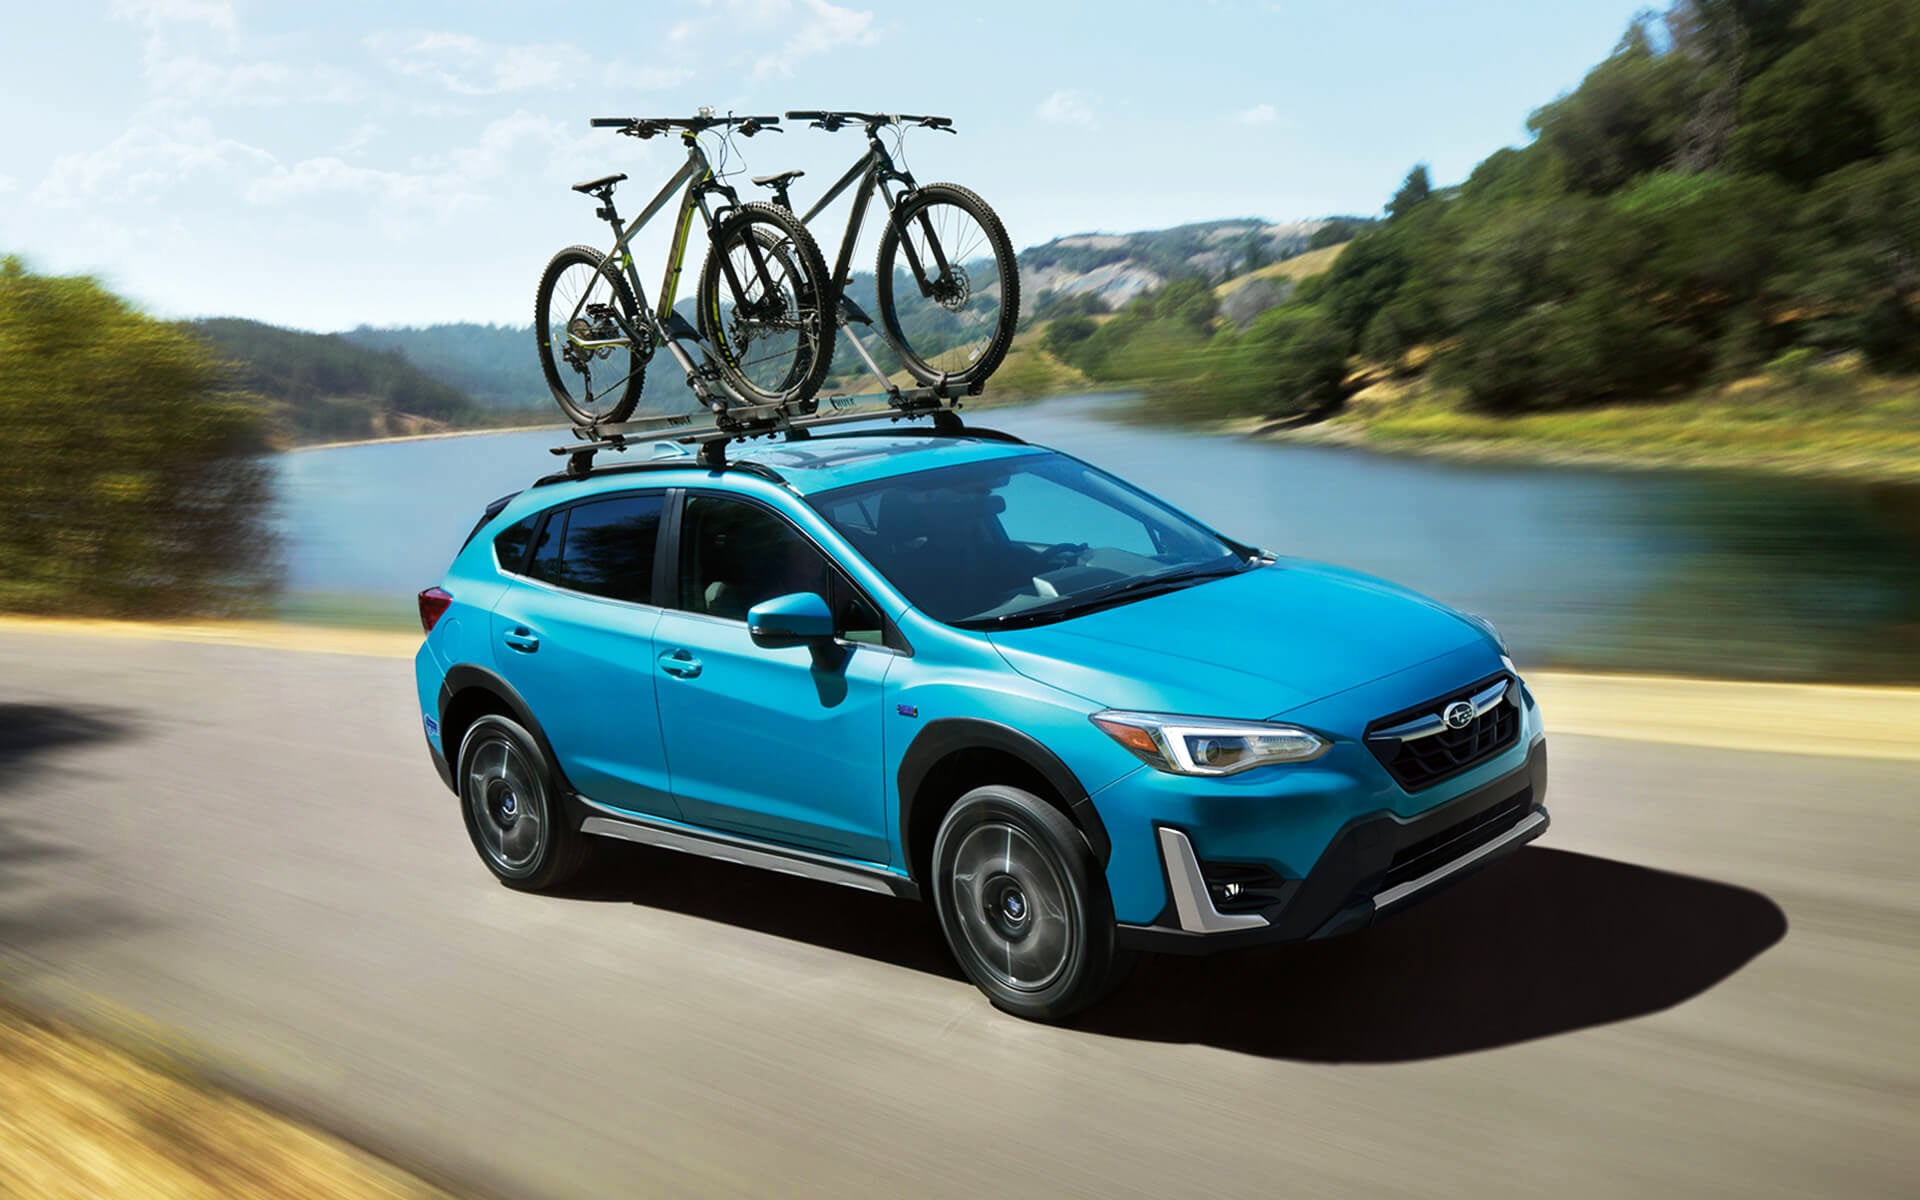 A blue Crosstrek Hybrid with two bicycles on its roof rack driving beside a river | Open Road Subaru in Union NJ